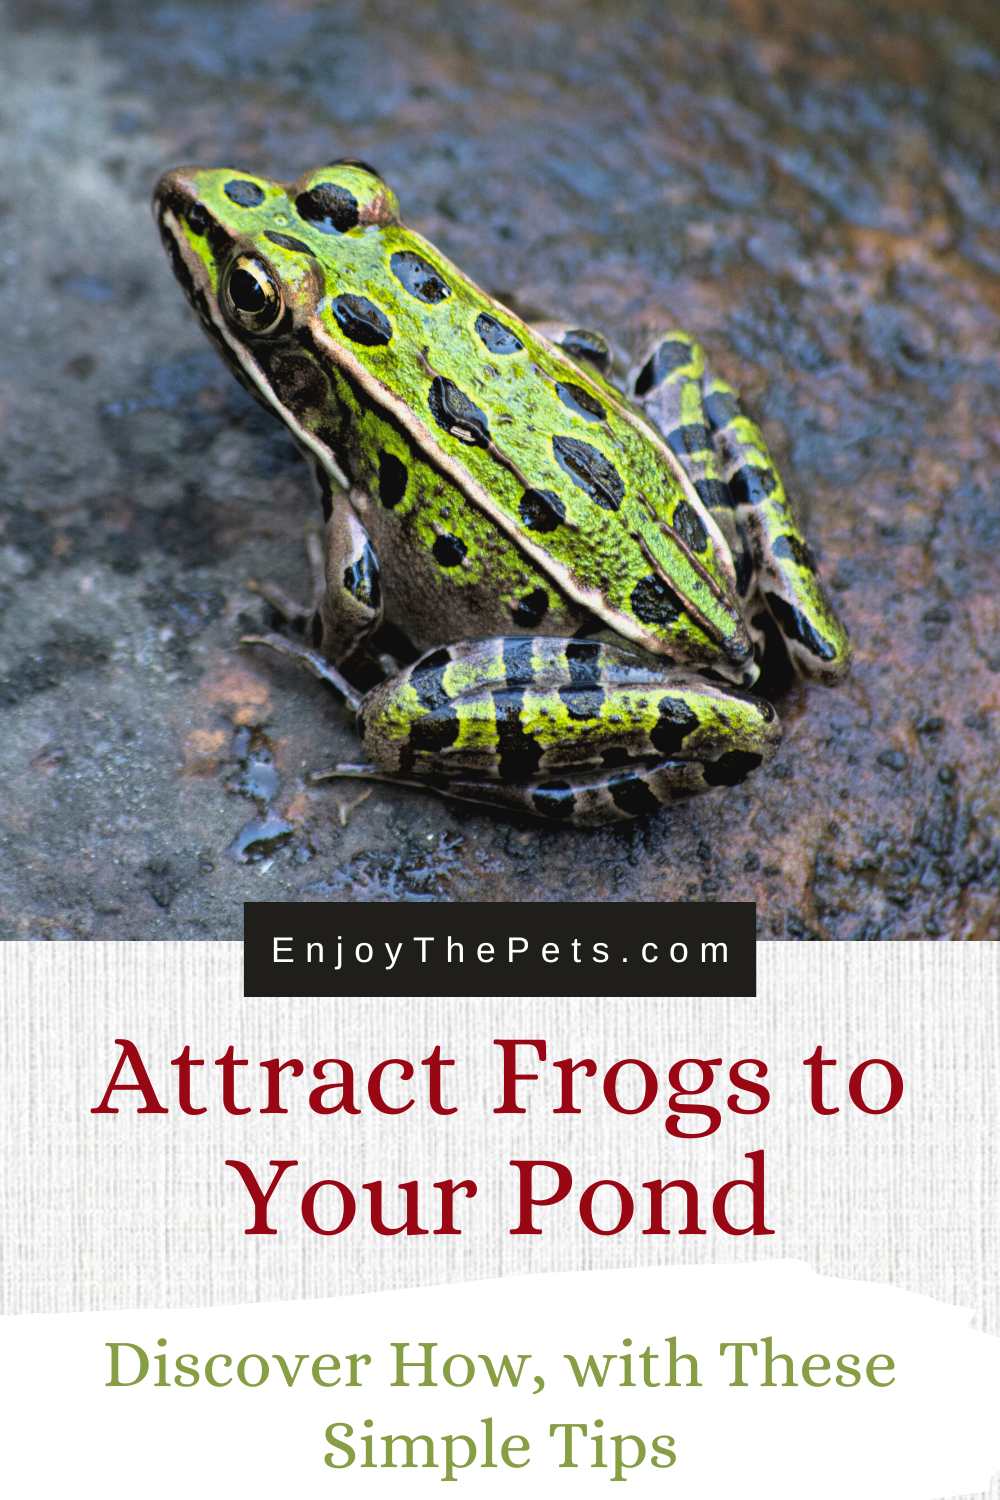 Discover How to Attract Frogs to Your Pond with These Simple Tips